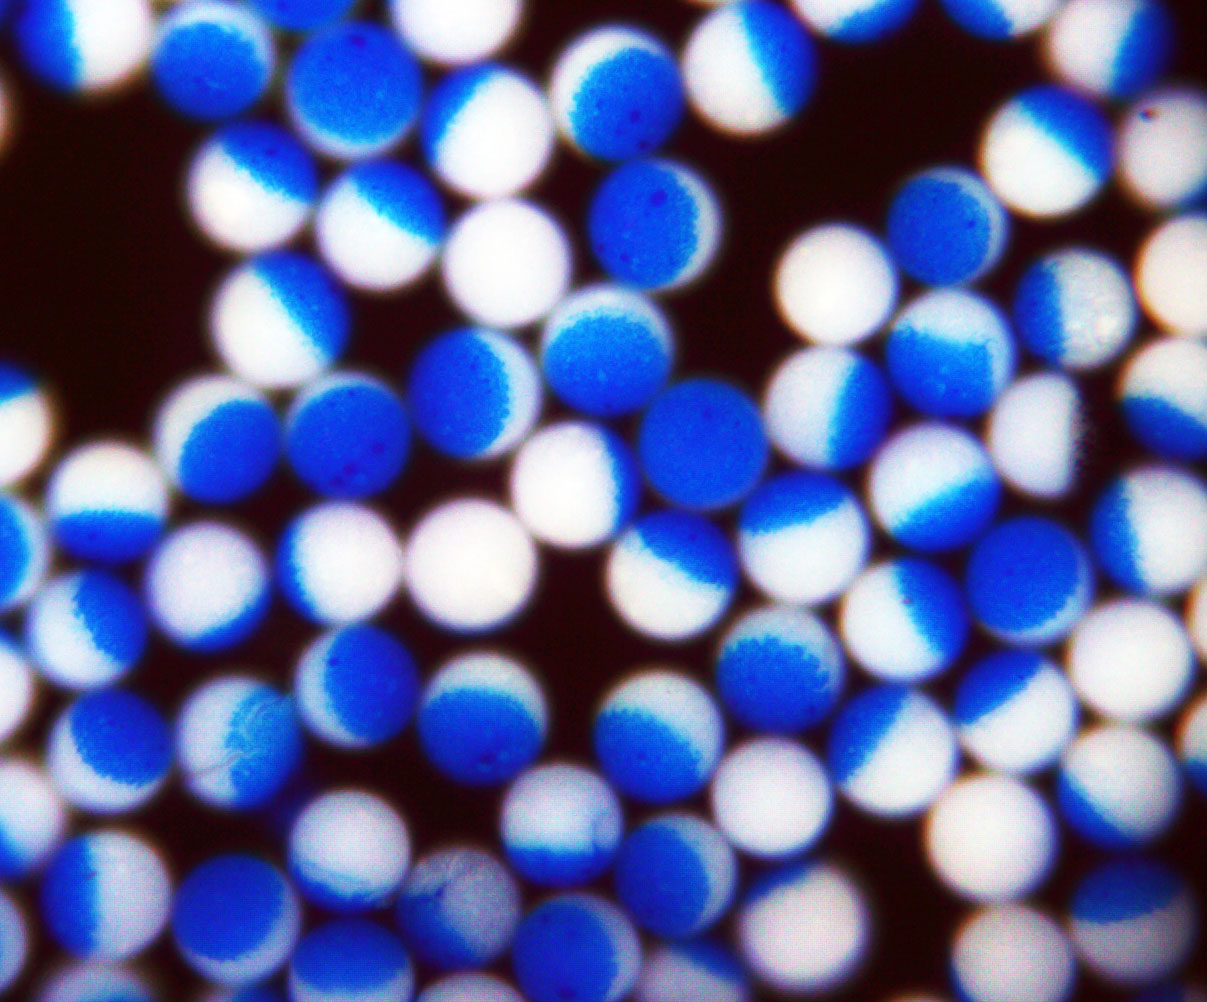 Hemispherically-Coated Bicolor Microspheres, Microparticles